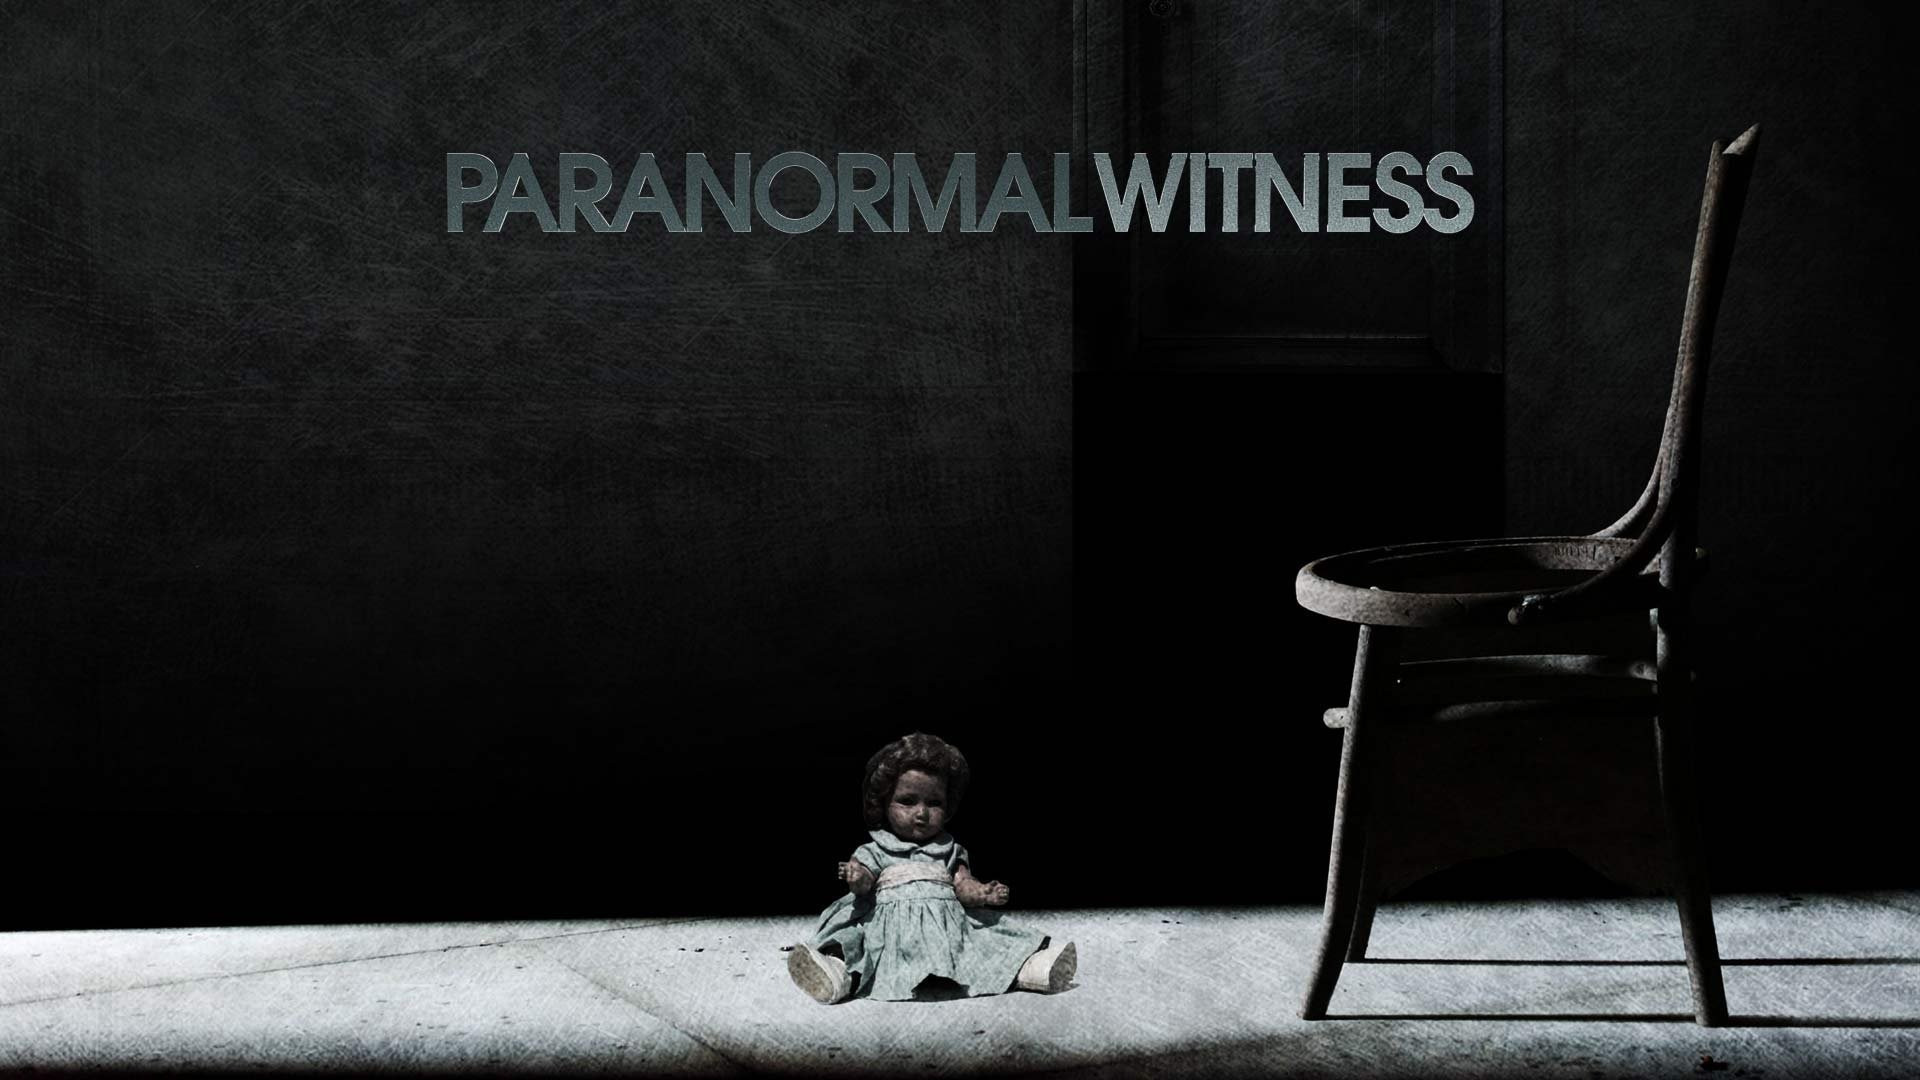 Show Paranormal Witness